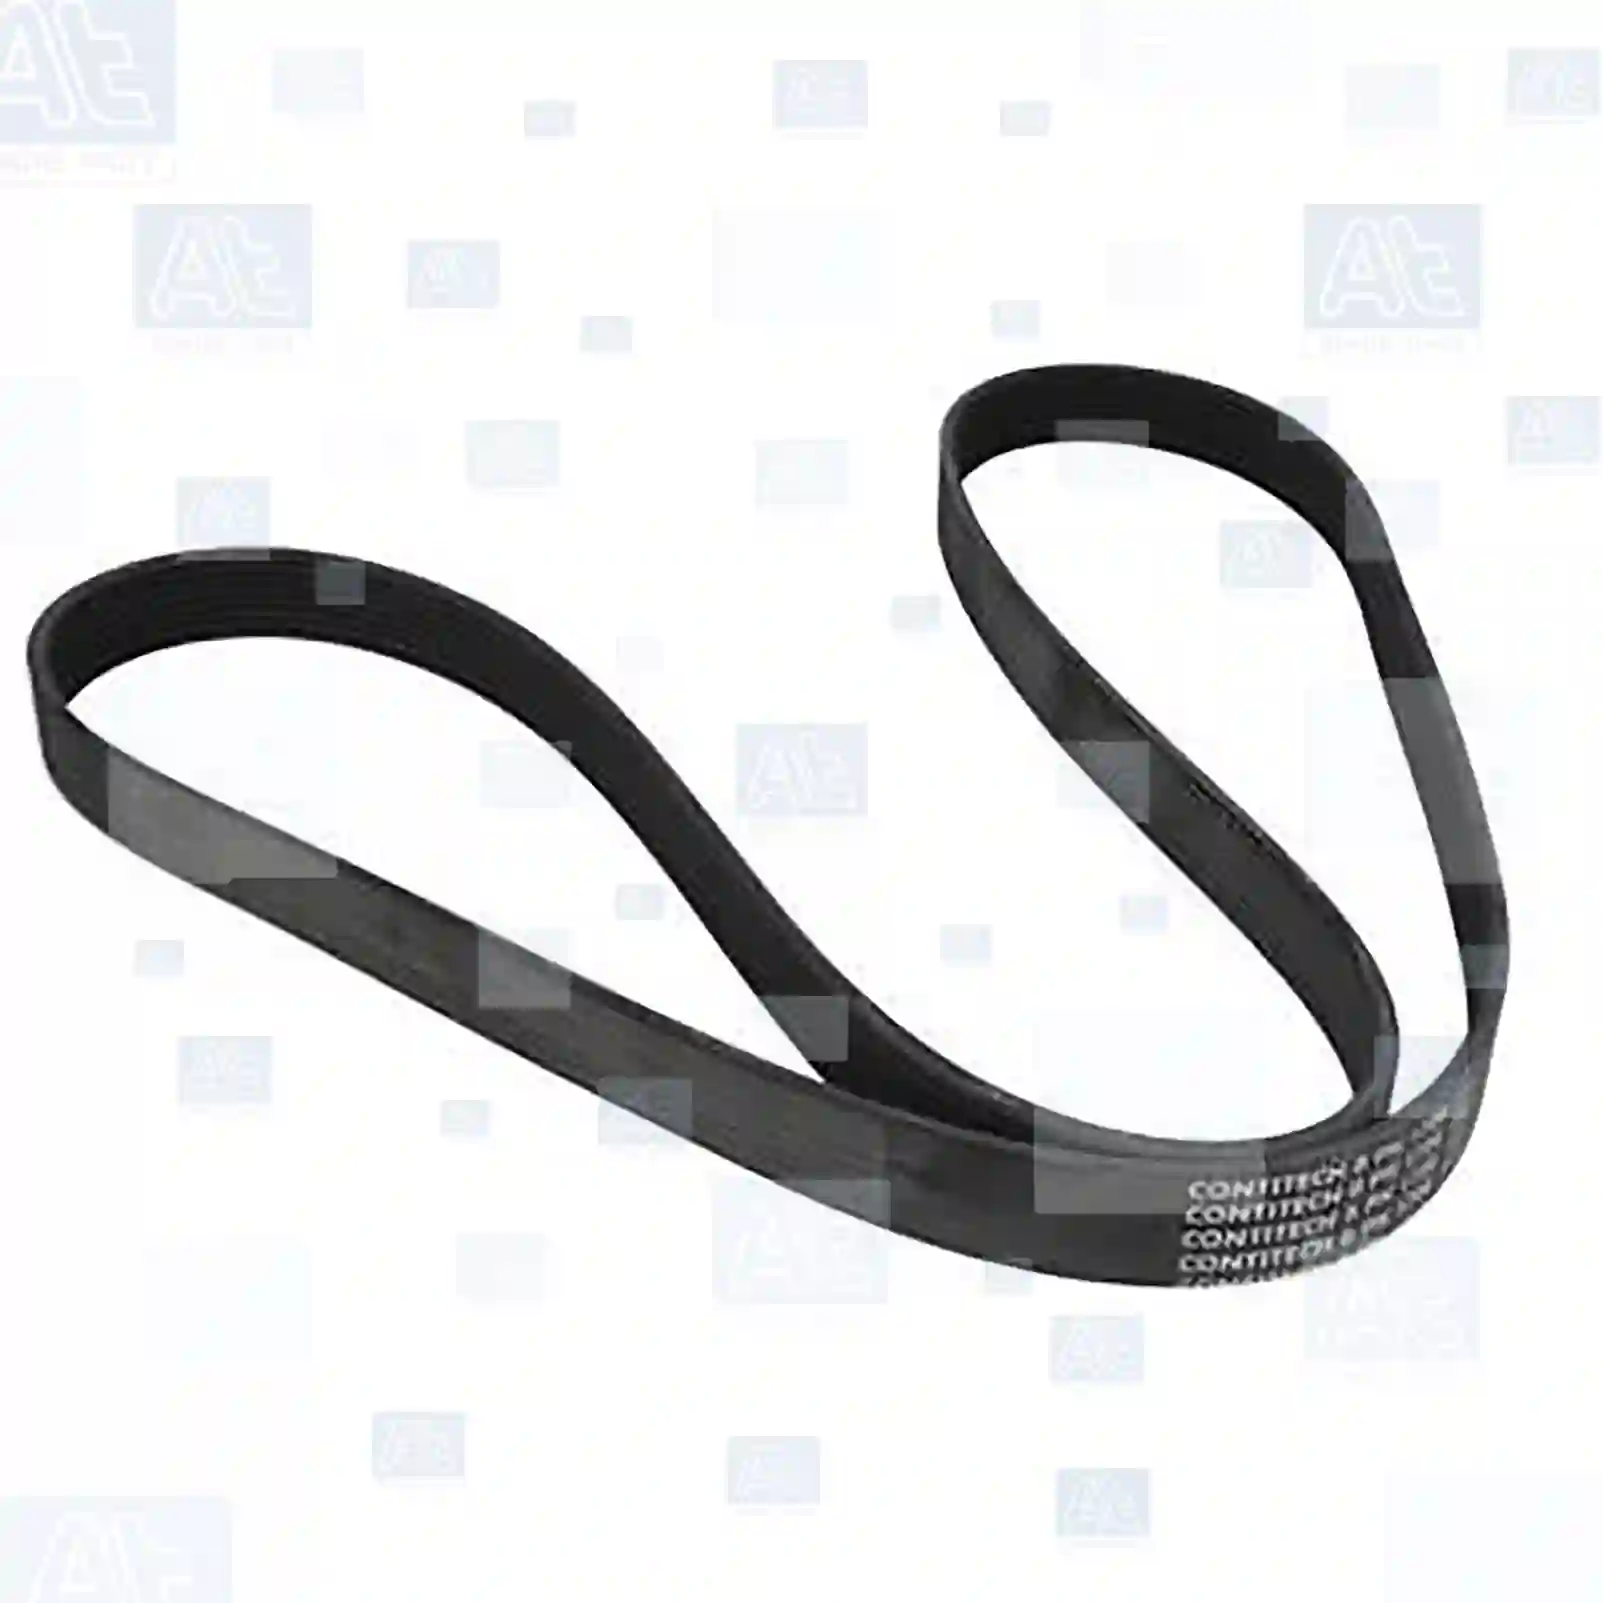 Multiribbed belt, at no 77708447, oem no: 074145933P, 11288573252, 55566899, 5750LG, 5750WP, 4891661AA, 71739909, 9654114480, 1014374, 1079384, 1133960, 6727879, 55566900, 4891661AA, 07788012, 46414860, 46787908, 71739909, 11288573252, 4451A020, 4451A059, 4451A108, 1340004, 5750LG, 5750WP, 074145933P, 074145933P, 95141-73J00, 074145933C, 074145933P At Spare Part | Engine, Accelerator Pedal, Camshaft, Connecting Rod, Crankcase, Crankshaft, Cylinder Head, Engine Suspension Mountings, Exhaust Manifold, Exhaust Gas Recirculation, Filter Kits, Flywheel Housing, General Overhaul Kits, Engine, Intake Manifold, Oil Cleaner, Oil Cooler, Oil Filter, Oil Pump, Oil Sump, Piston & Liner, Sensor & Switch, Timing Case, Turbocharger, Cooling System, Belt Tensioner, Coolant Filter, Coolant Pipe, Corrosion Prevention Agent, Drive, Expansion Tank, Fan, Intercooler, Monitors & Gauges, Radiator, Thermostat, V-Belt / Timing belt, Water Pump, Fuel System, Electronical Injector Unit, Feed Pump, Fuel Filter, cpl., Fuel Gauge Sender,  Fuel Line, Fuel Pump, Fuel Tank, Injection Line Kit, Injection Pump, Exhaust System, Clutch & Pedal, Gearbox, Propeller Shaft, Axles, Brake System, Hubs & Wheels, Suspension, Leaf Spring, Universal Parts / Accessories, Steering, Electrical System, Cabin Multiribbed belt, at no 77708447, oem no: 074145933P, 11288573252, 55566899, 5750LG, 5750WP, 4891661AA, 71739909, 9654114480, 1014374, 1079384, 1133960, 6727879, 55566900, 4891661AA, 07788012, 46414860, 46787908, 71739909, 11288573252, 4451A020, 4451A059, 4451A108, 1340004, 5750LG, 5750WP, 074145933P, 074145933P, 95141-73J00, 074145933C, 074145933P At Spare Part | Engine, Accelerator Pedal, Camshaft, Connecting Rod, Crankcase, Crankshaft, Cylinder Head, Engine Suspension Mountings, Exhaust Manifold, Exhaust Gas Recirculation, Filter Kits, Flywheel Housing, General Overhaul Kits, Engine, Intake Manifold, Oil Cleaner, Oil Cooler, Oil Filter, Oil Pump, Oil Sump, Piston & Liner, Sensor & Switch, Timing Case, Turbocharger, Cooling System, Belt Tensioner, Coolant Filter, Coolant Pipe, Corrosion Prevention Agent, Drive, Expansion Tank, Fan, Intercooler, Monitors & Gauges, Radiator, Thermostat, V-Belt / Timing belt, Water Pump, Fuel System, Electronical Injector Unit, Feed Pump, Fuel Filter, cpl., Fuel Gauge Sender,  Fuel Line, Fuel Pump, Fuel Tank, Injection Line Kit, Injection Pump, Exhaust System, Clutch & Pedal, Gearbox, Propeller Shaft, Axles, Brake System, Hubs & Wheels, Suspension, Leaf Spring, Universal Parts / Accessories, Steering, Electrical System, Cabin